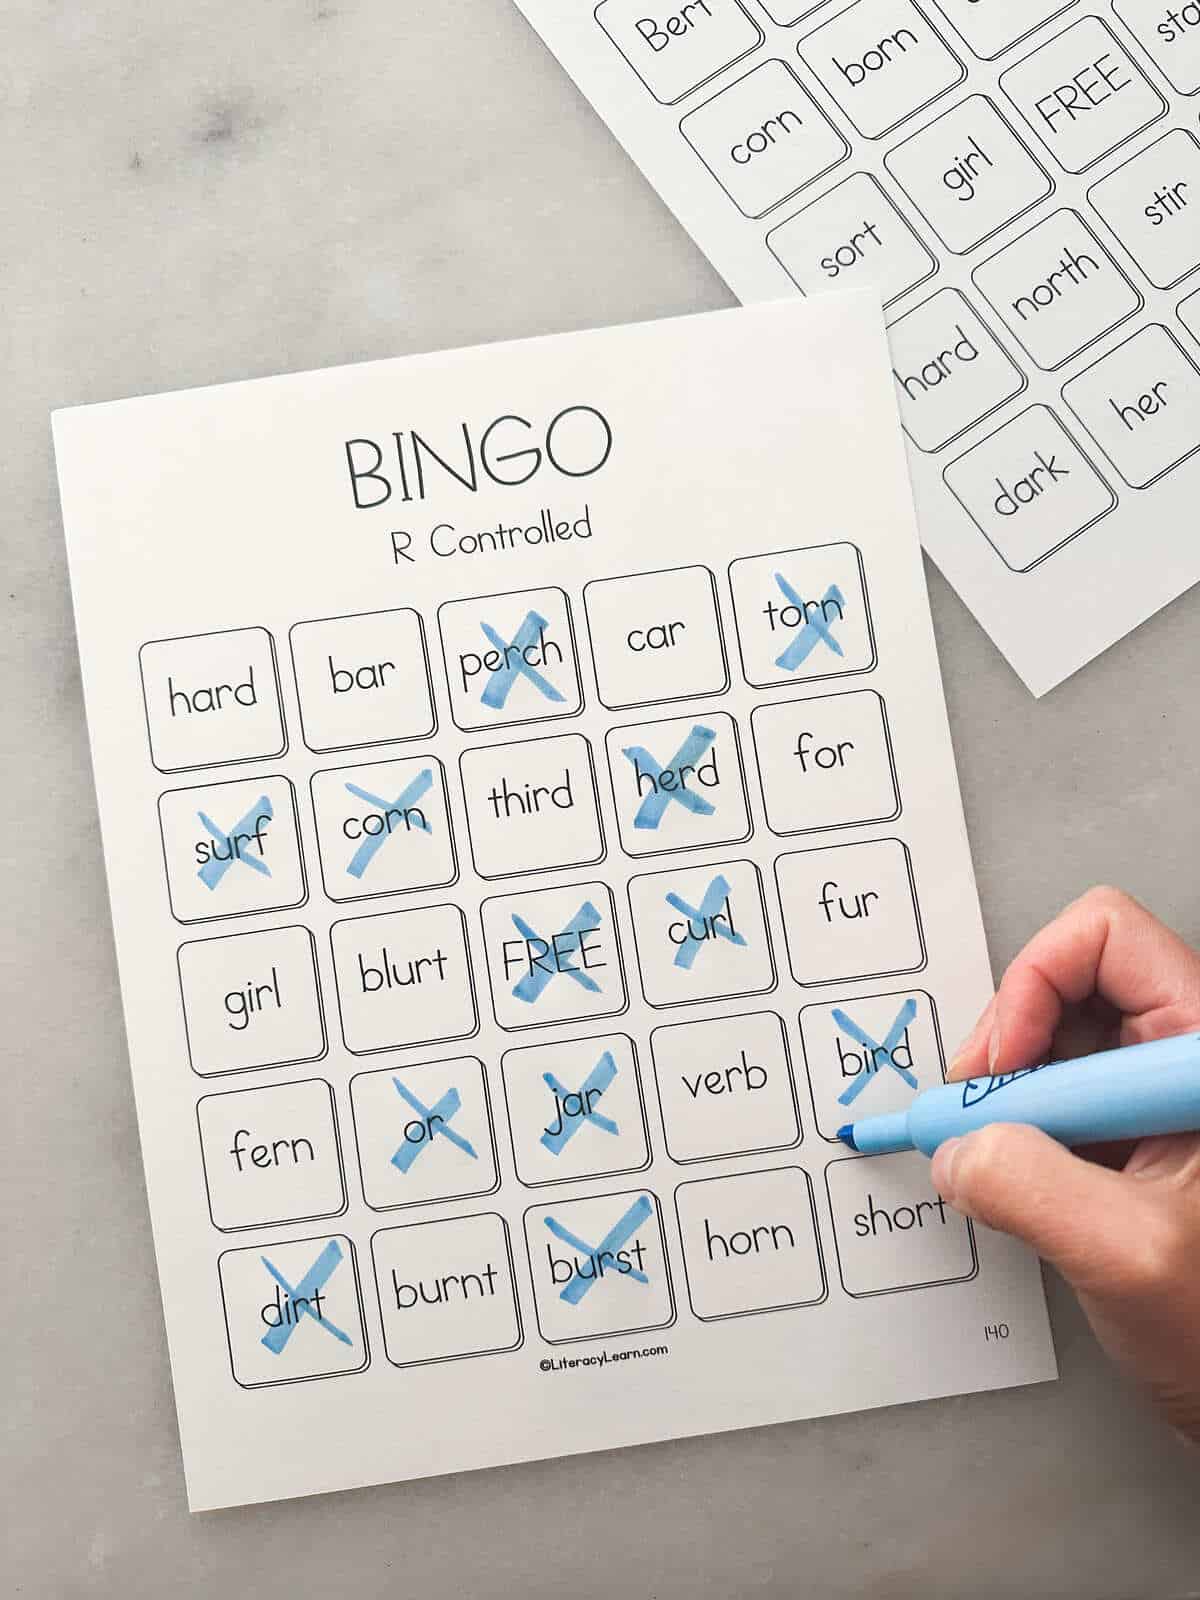 A child's hand marking words off with a blue marker on one R-Controlled Bingo card. 